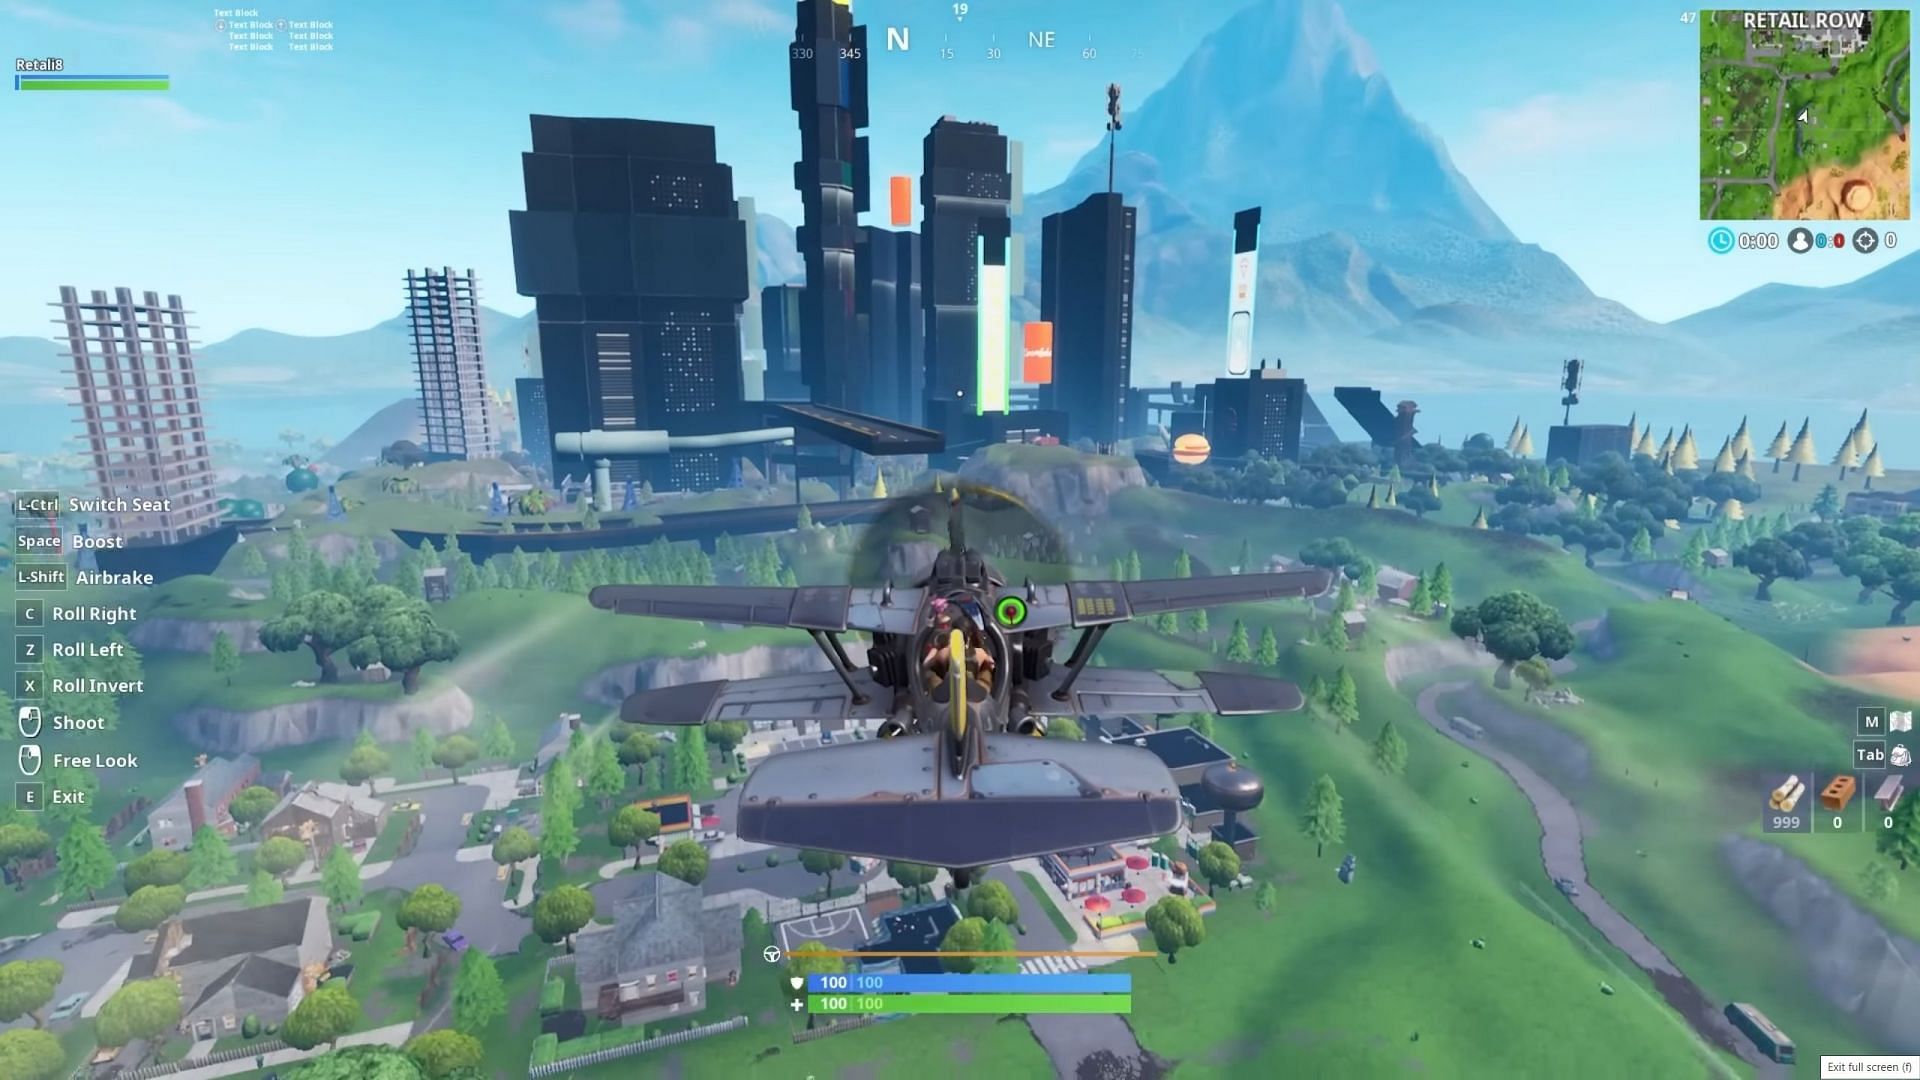 Tilted Towers would look tiny next to these massive skyscrapers (Image via Epic Games)